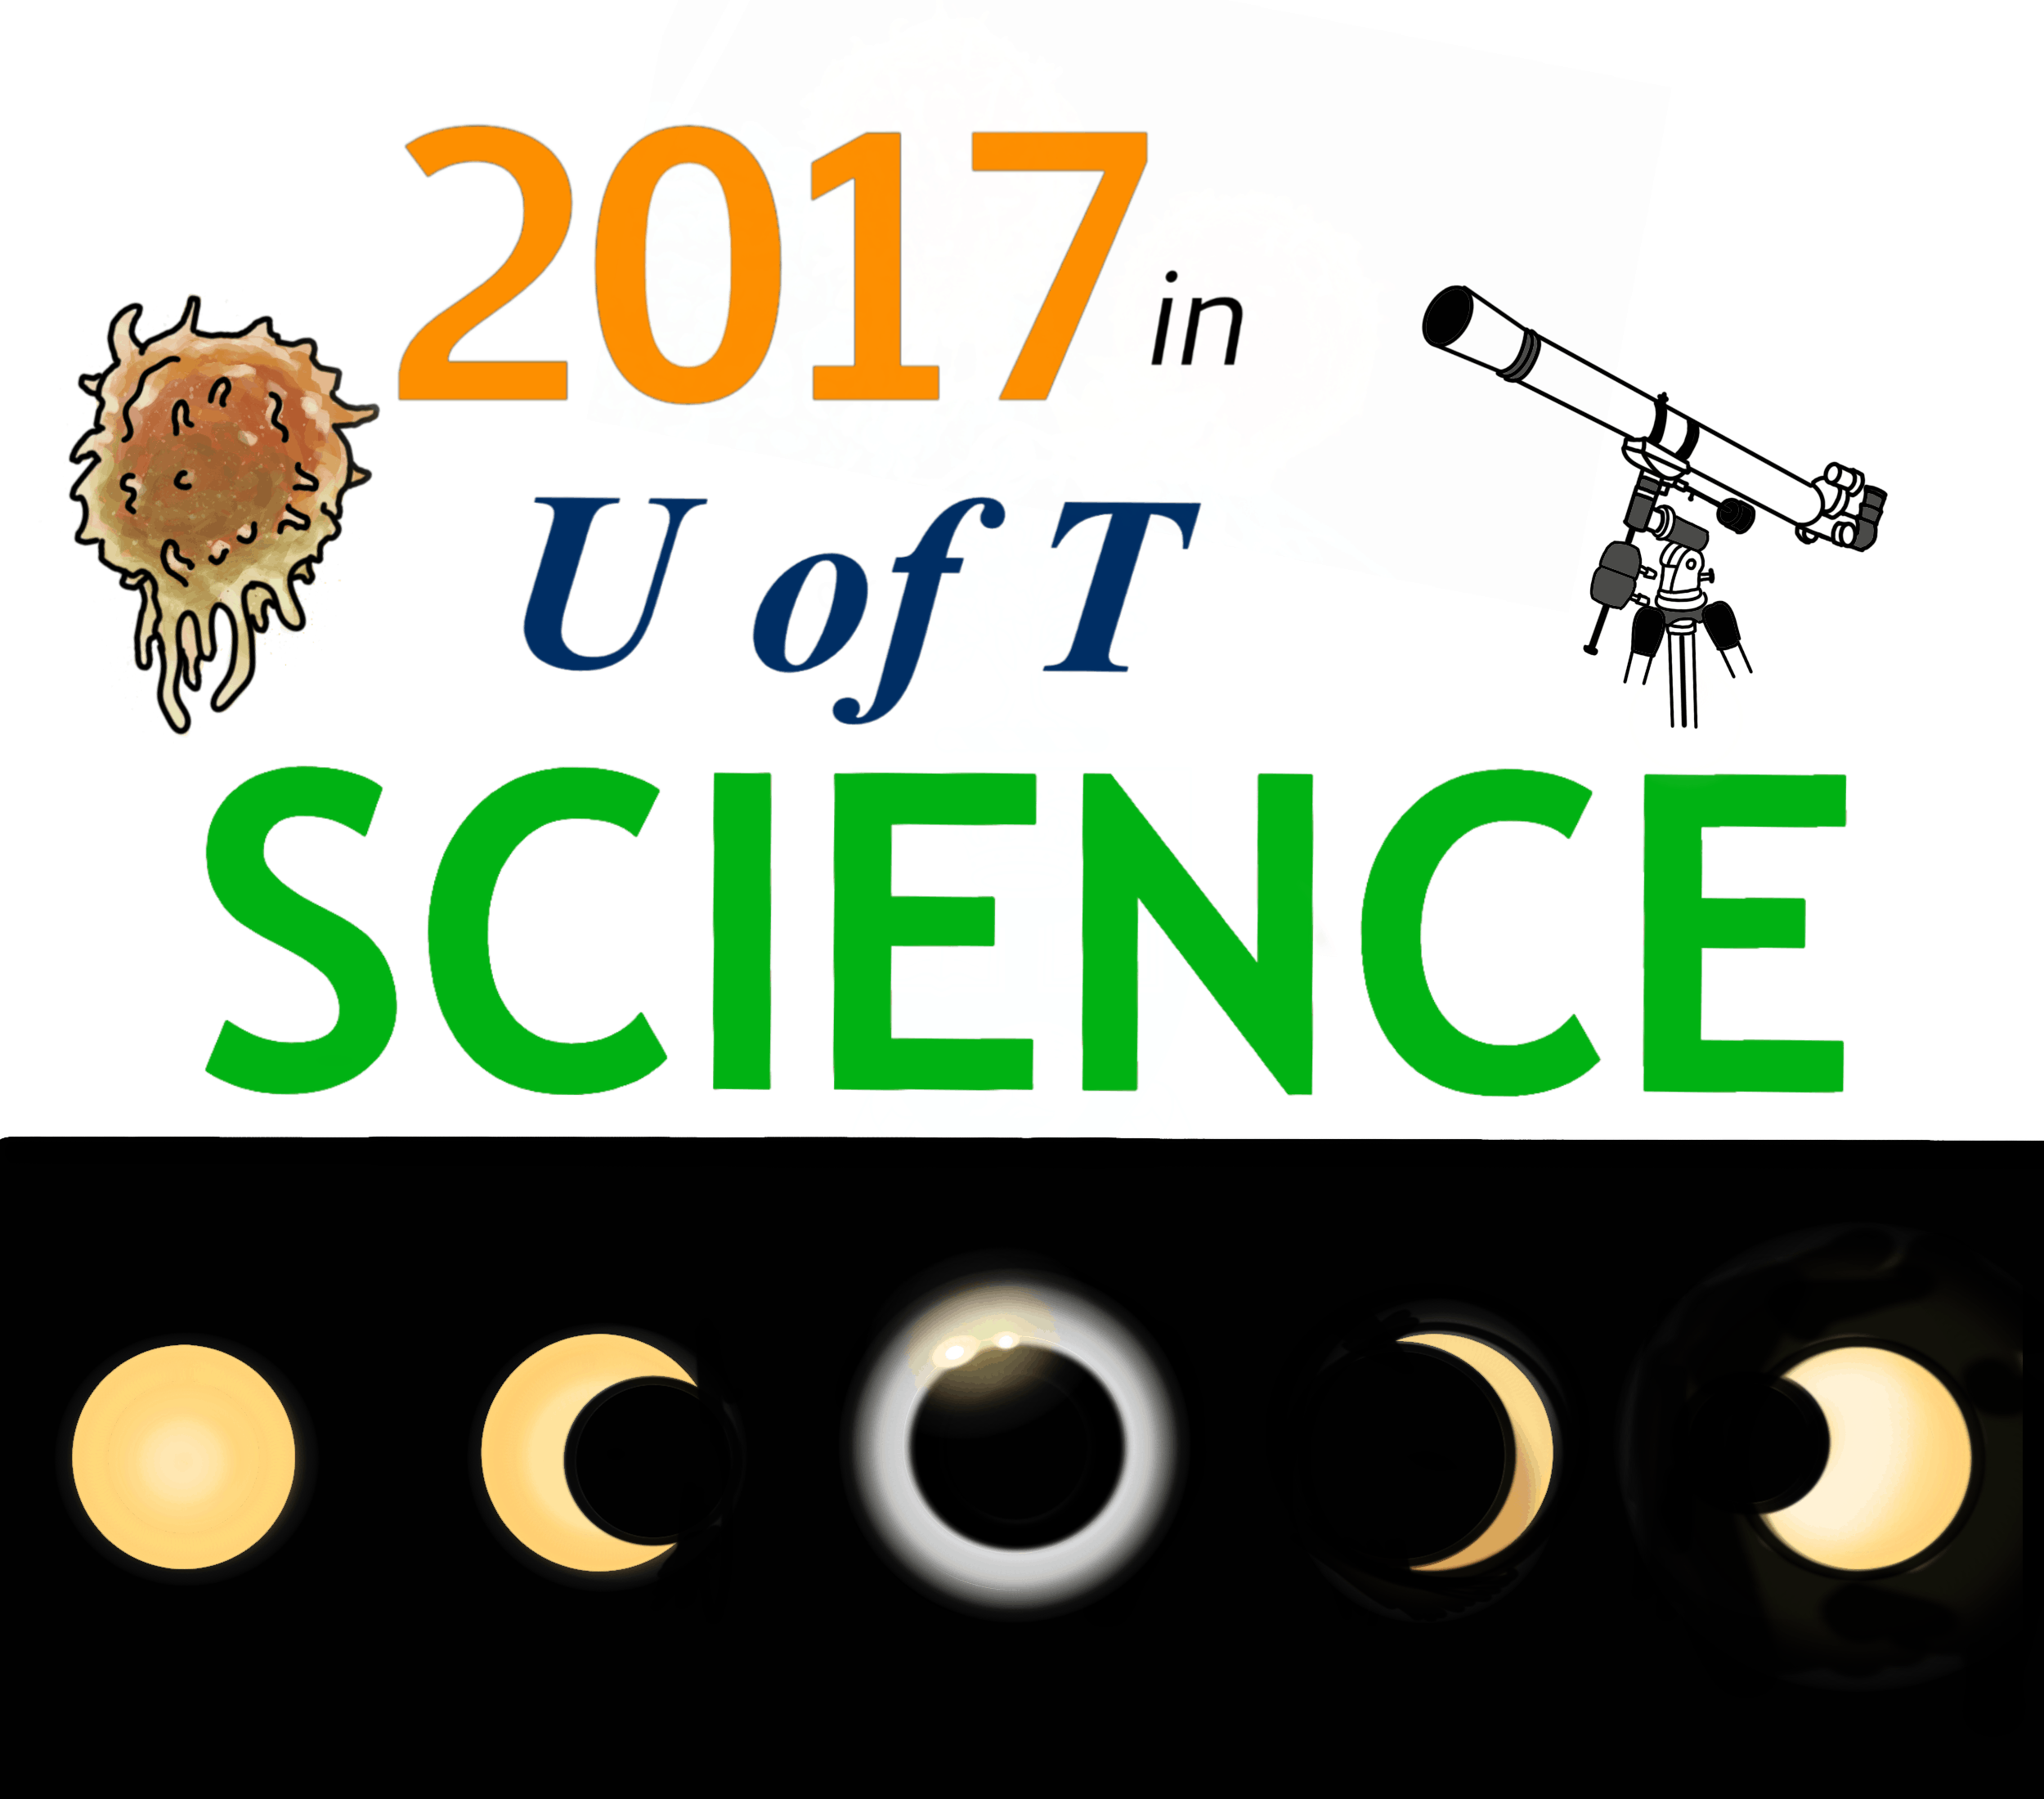 A year in review U of T scientific discoveries image